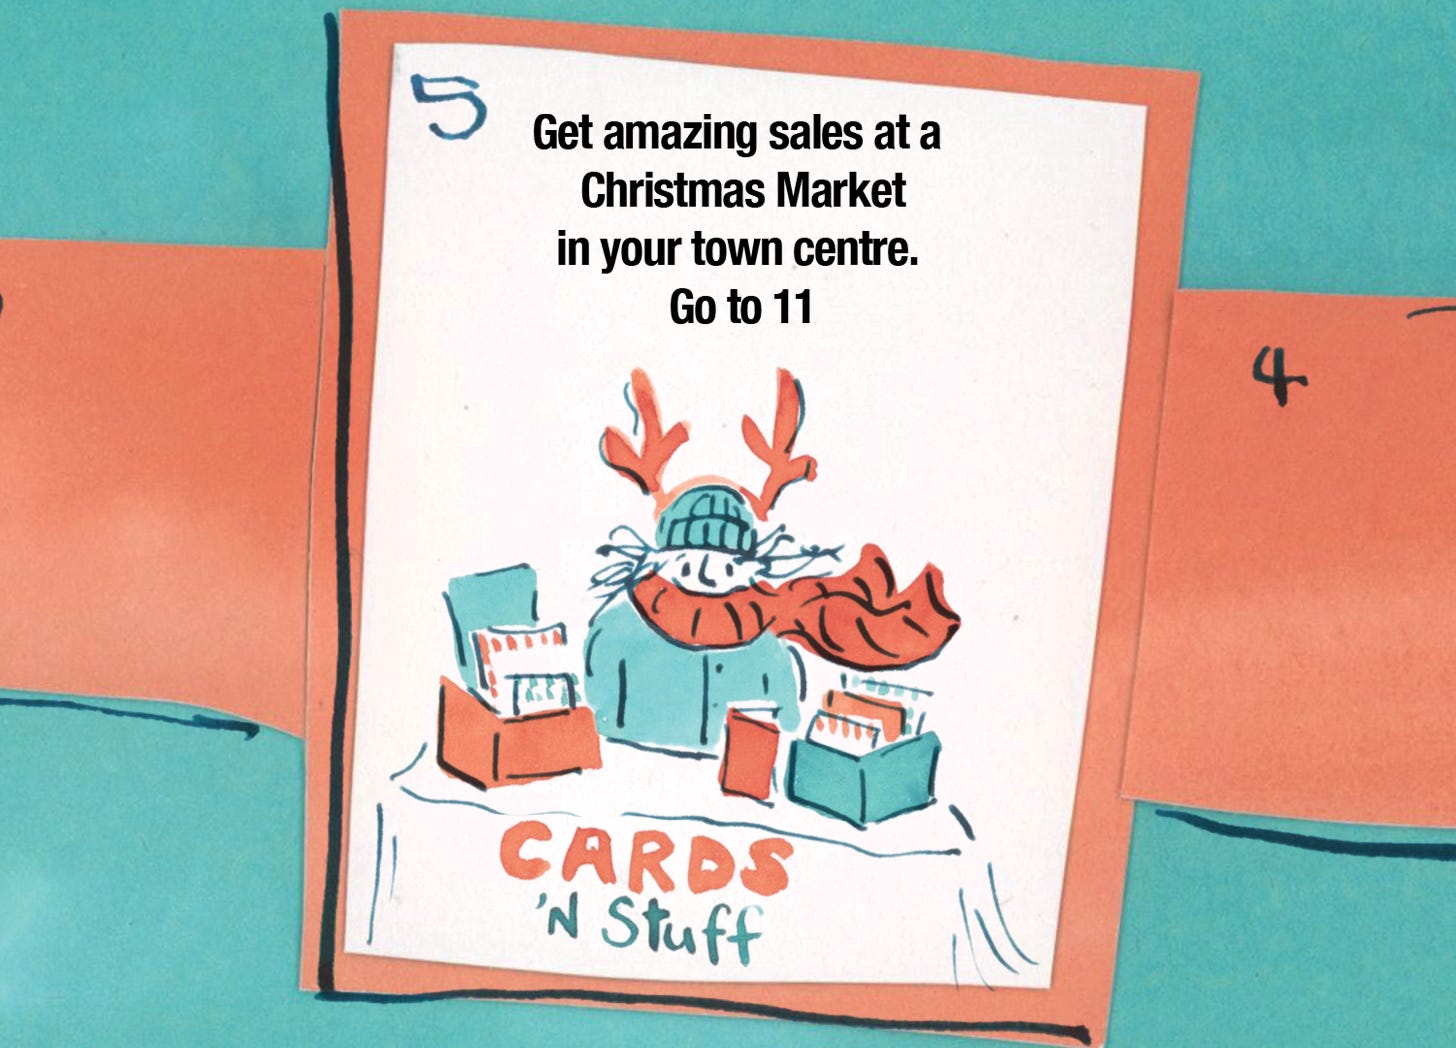 Single board game square. Text reads Get amazing sales at a Christmas Market in your town centre Go to 11. 